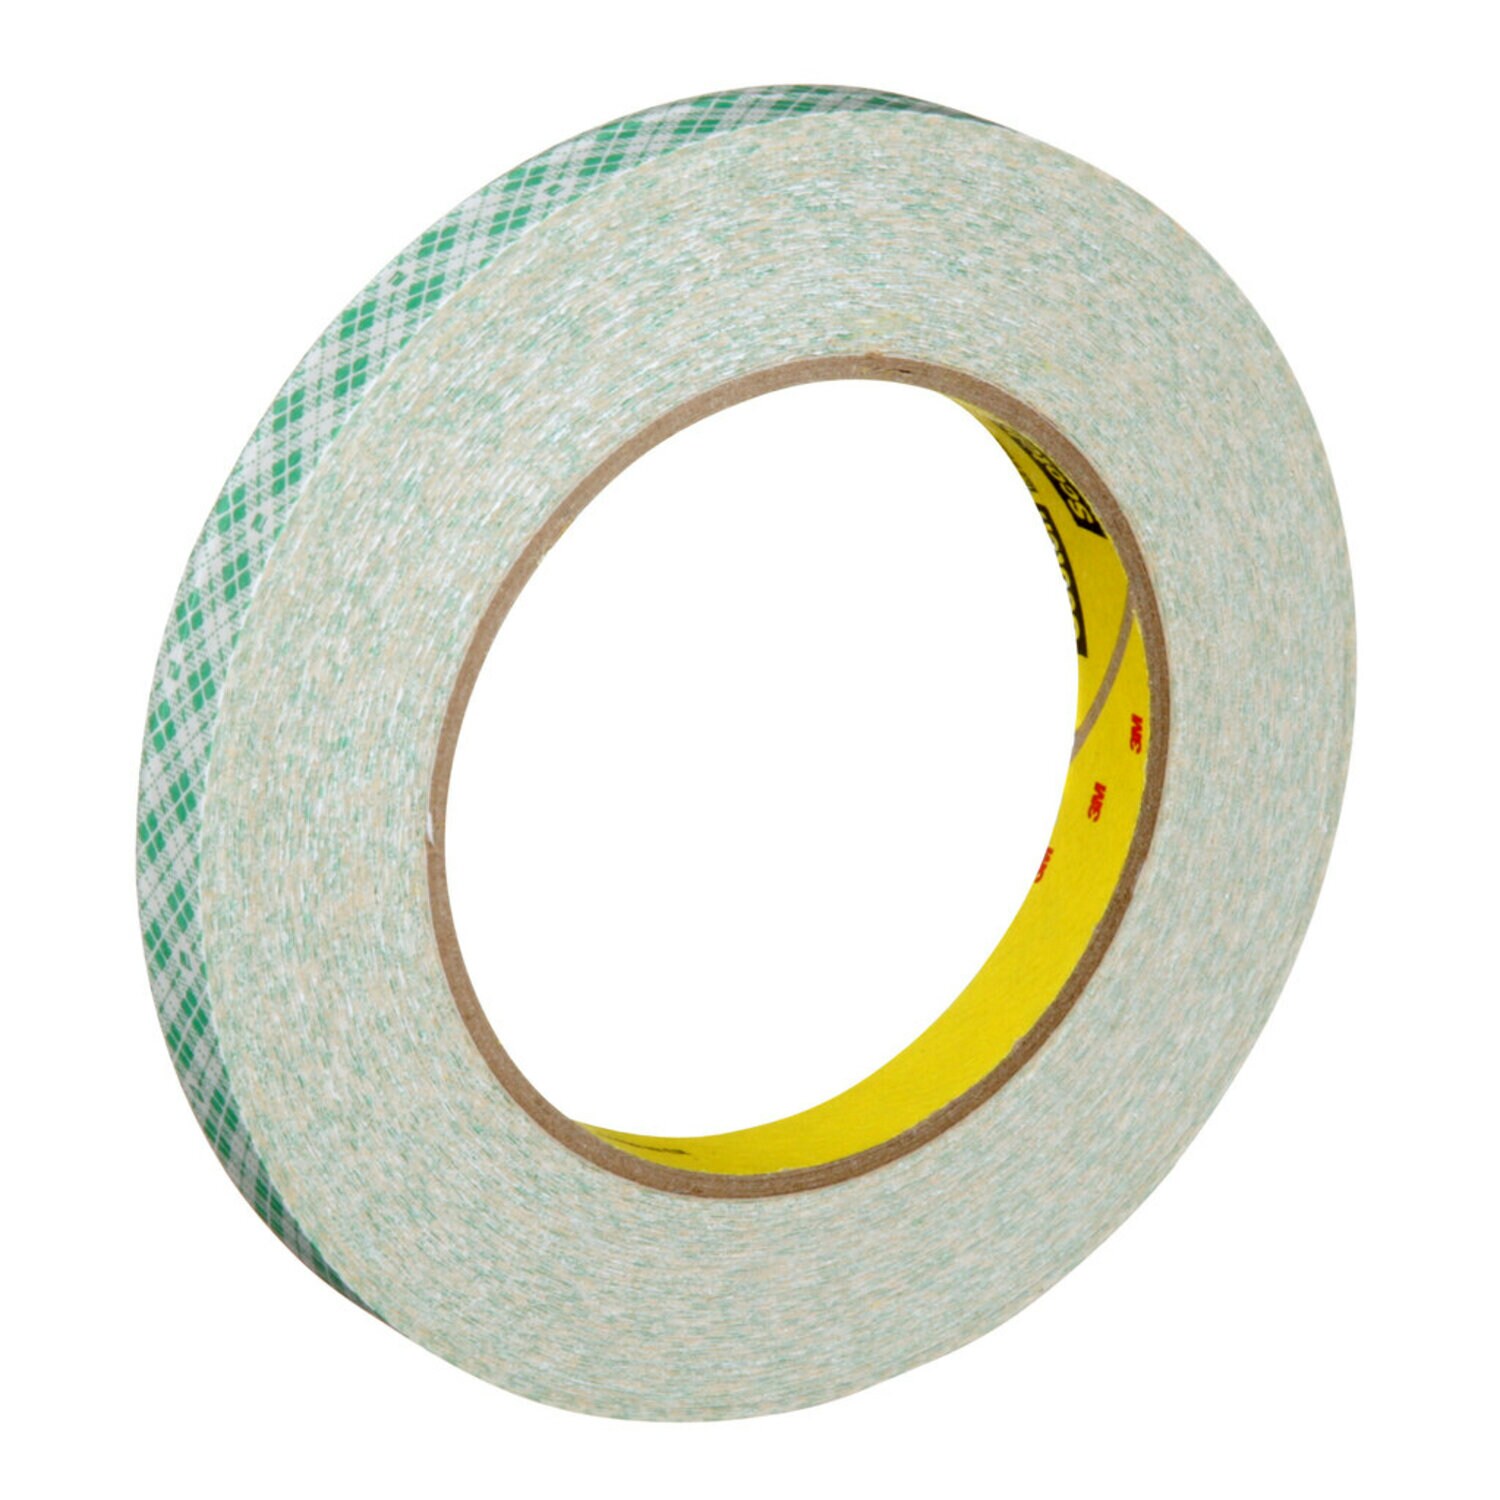 3M Glass Cloth Tape 361 White, 2 in. x 60 yd. 7.5 Mil